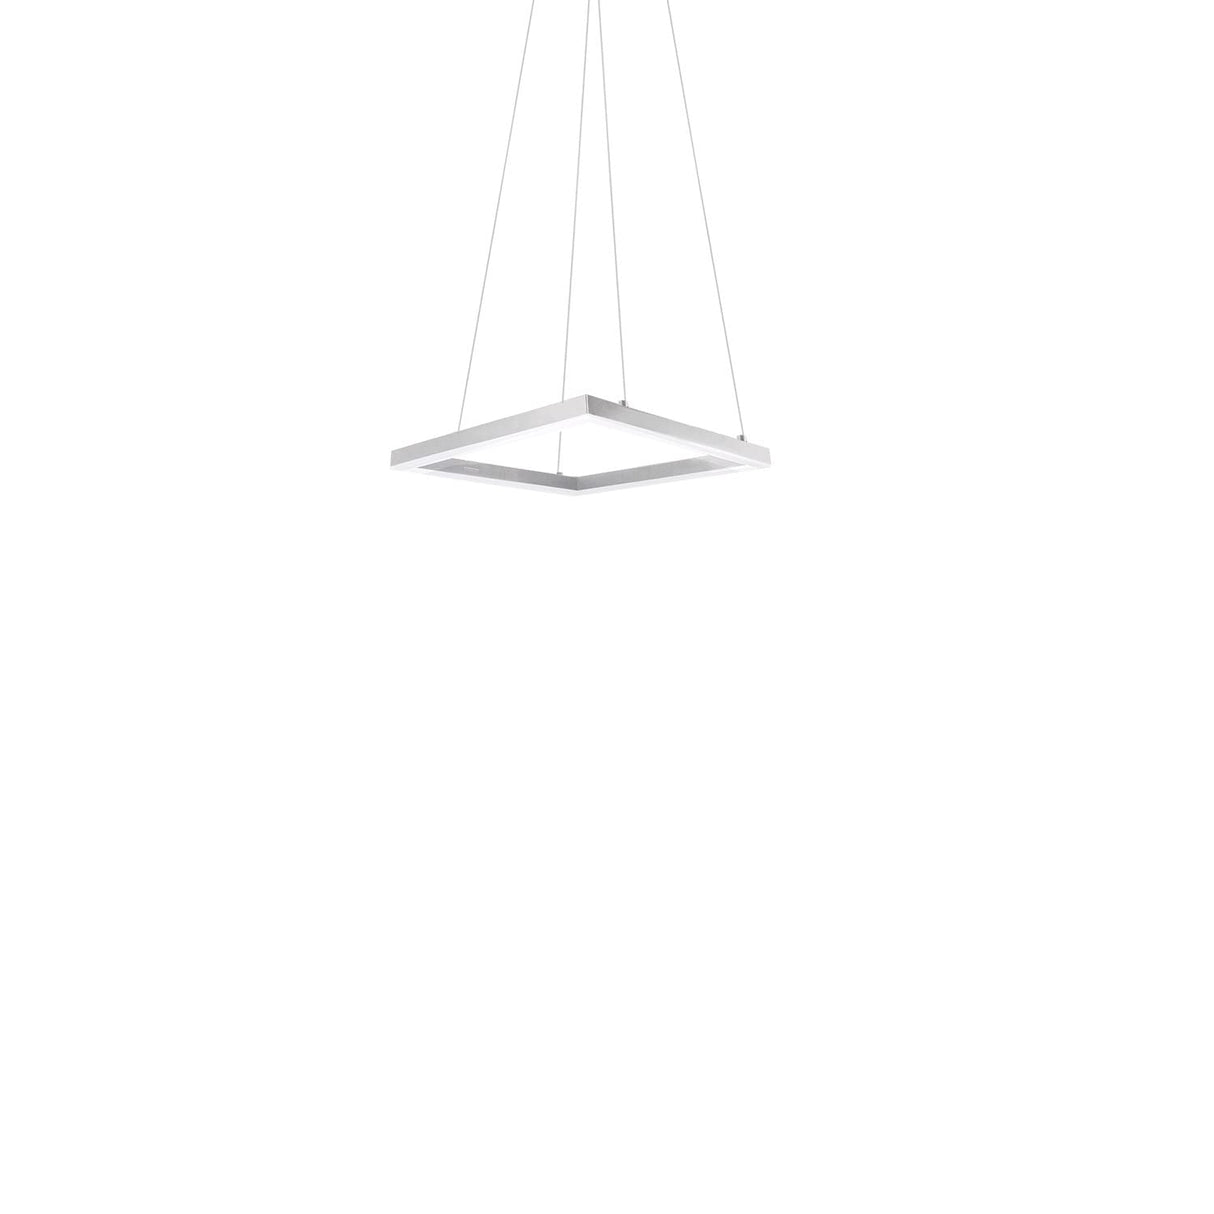 Kuzco PD88136-WH PIAZZA 36" PENDANT WH TEXTURED DOWN ONLY DUO CANOPY 930 TRIAC 120 78W